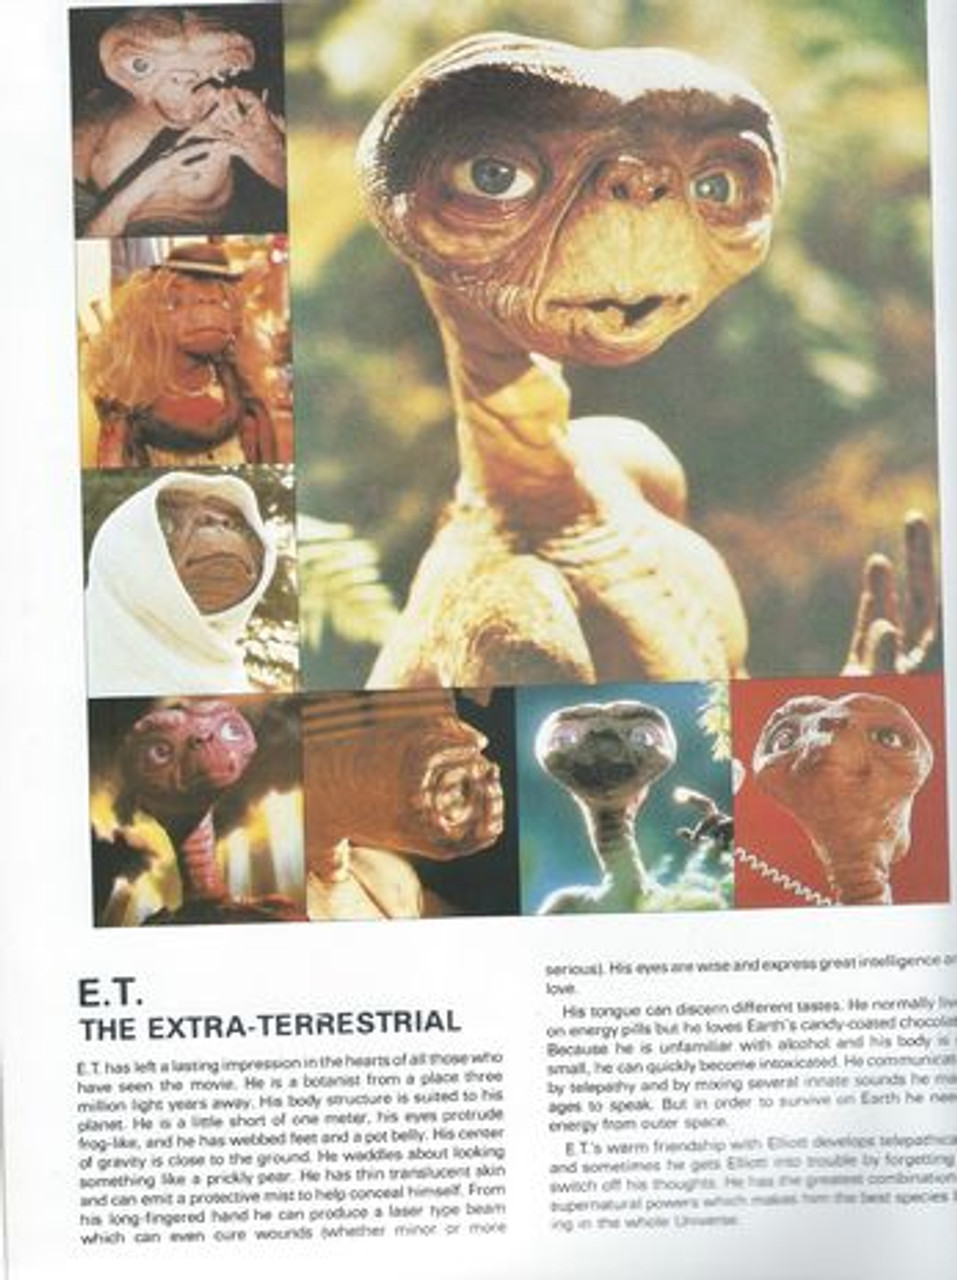 E.T.: The Extra-Terrestrial, film by Spielberg [1982]